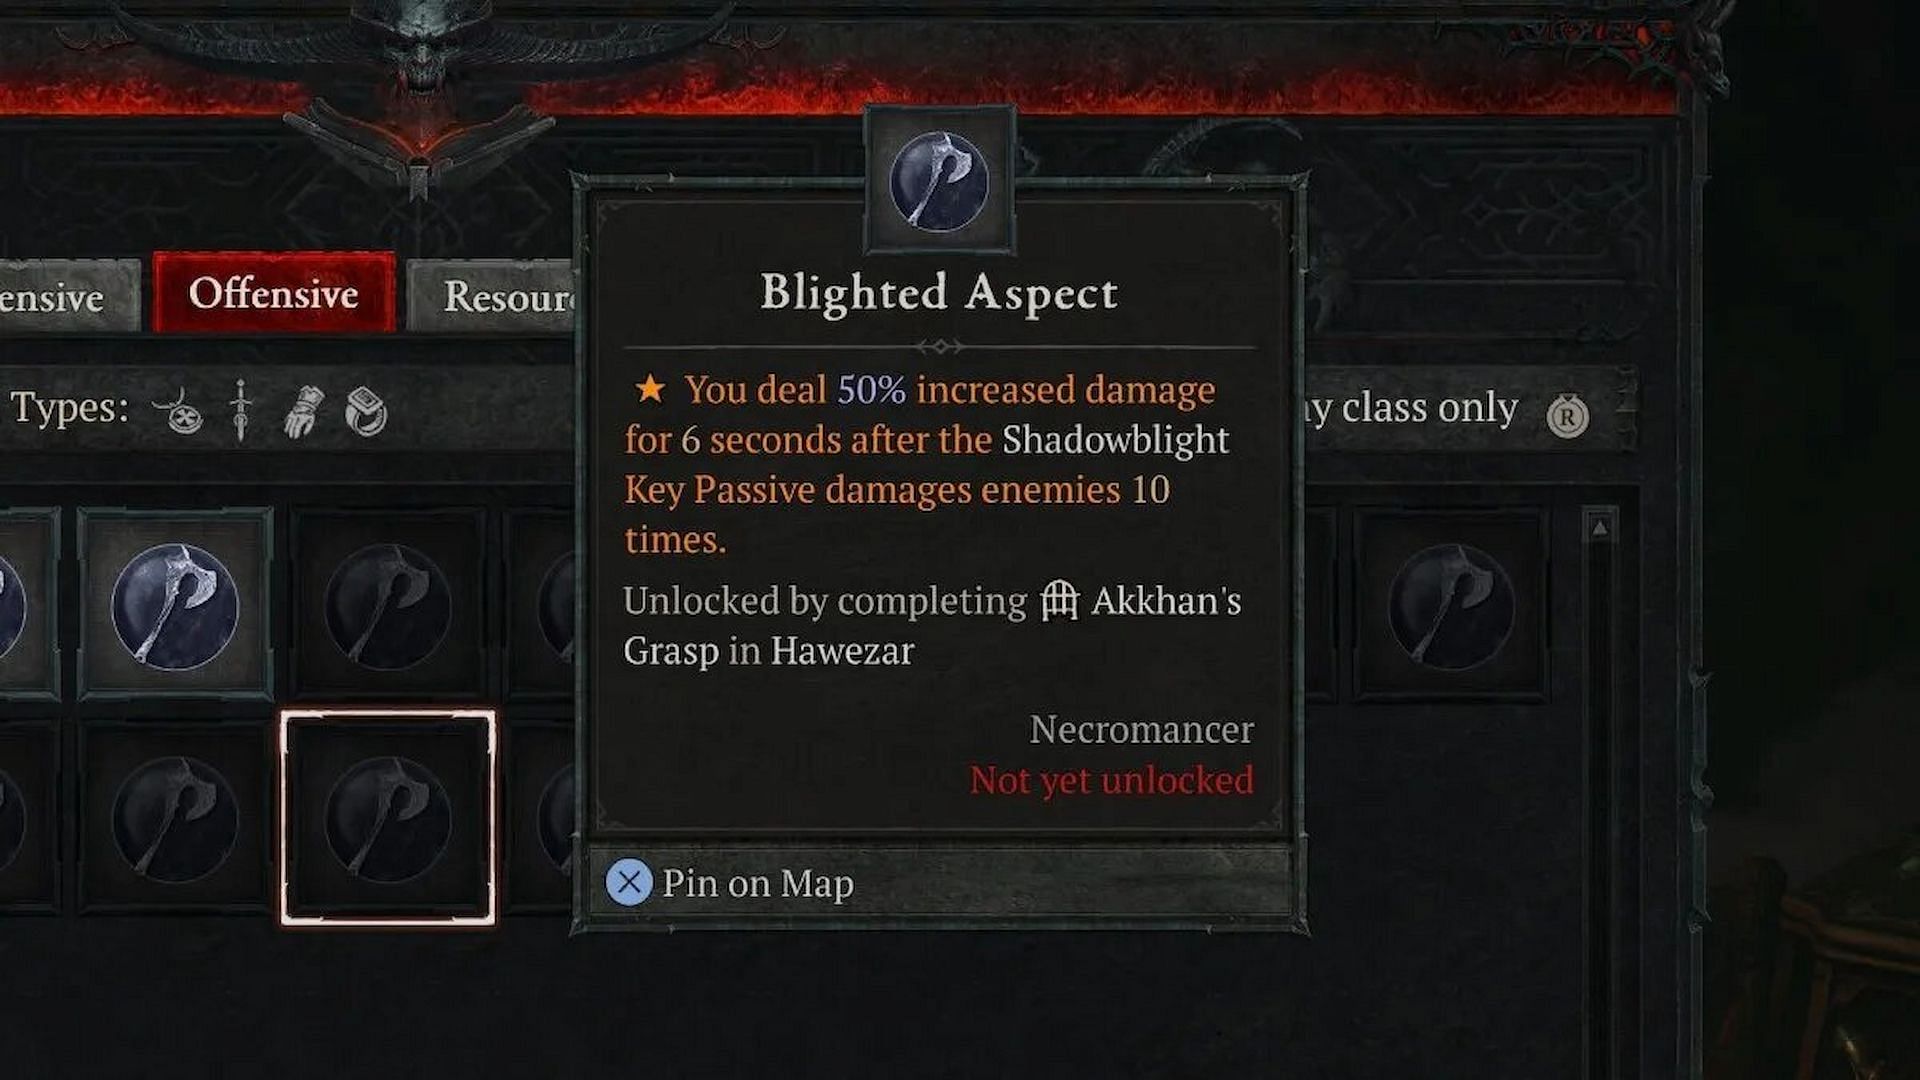 This Aspect enables you to deal increased damage upon using Shadowblight (Image via Diablo 4)